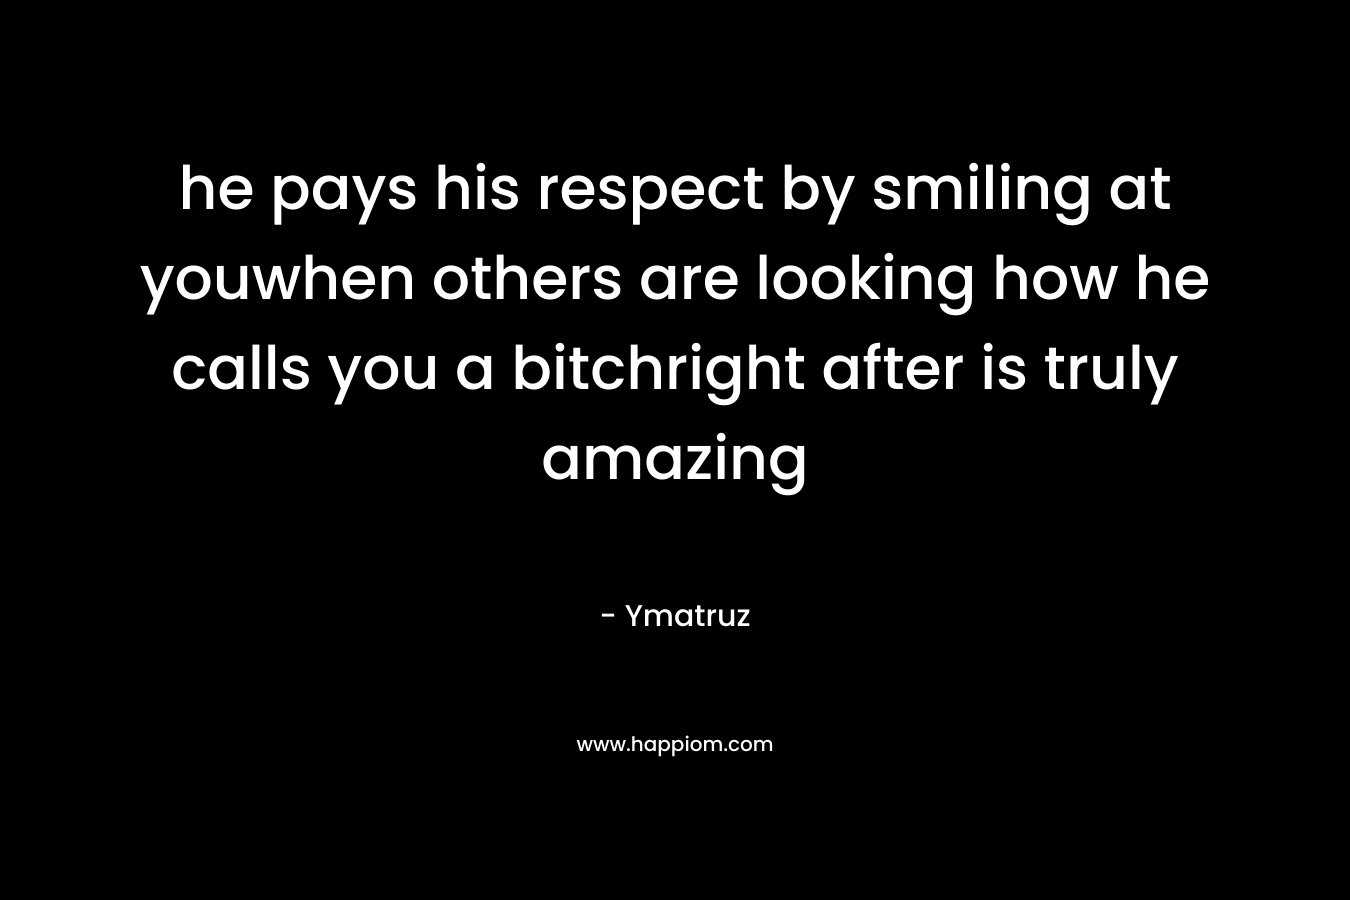 he pays his respect by smiling at youwhen others are looking how he calls you a bitchright after is truly amazing – Ymatruz